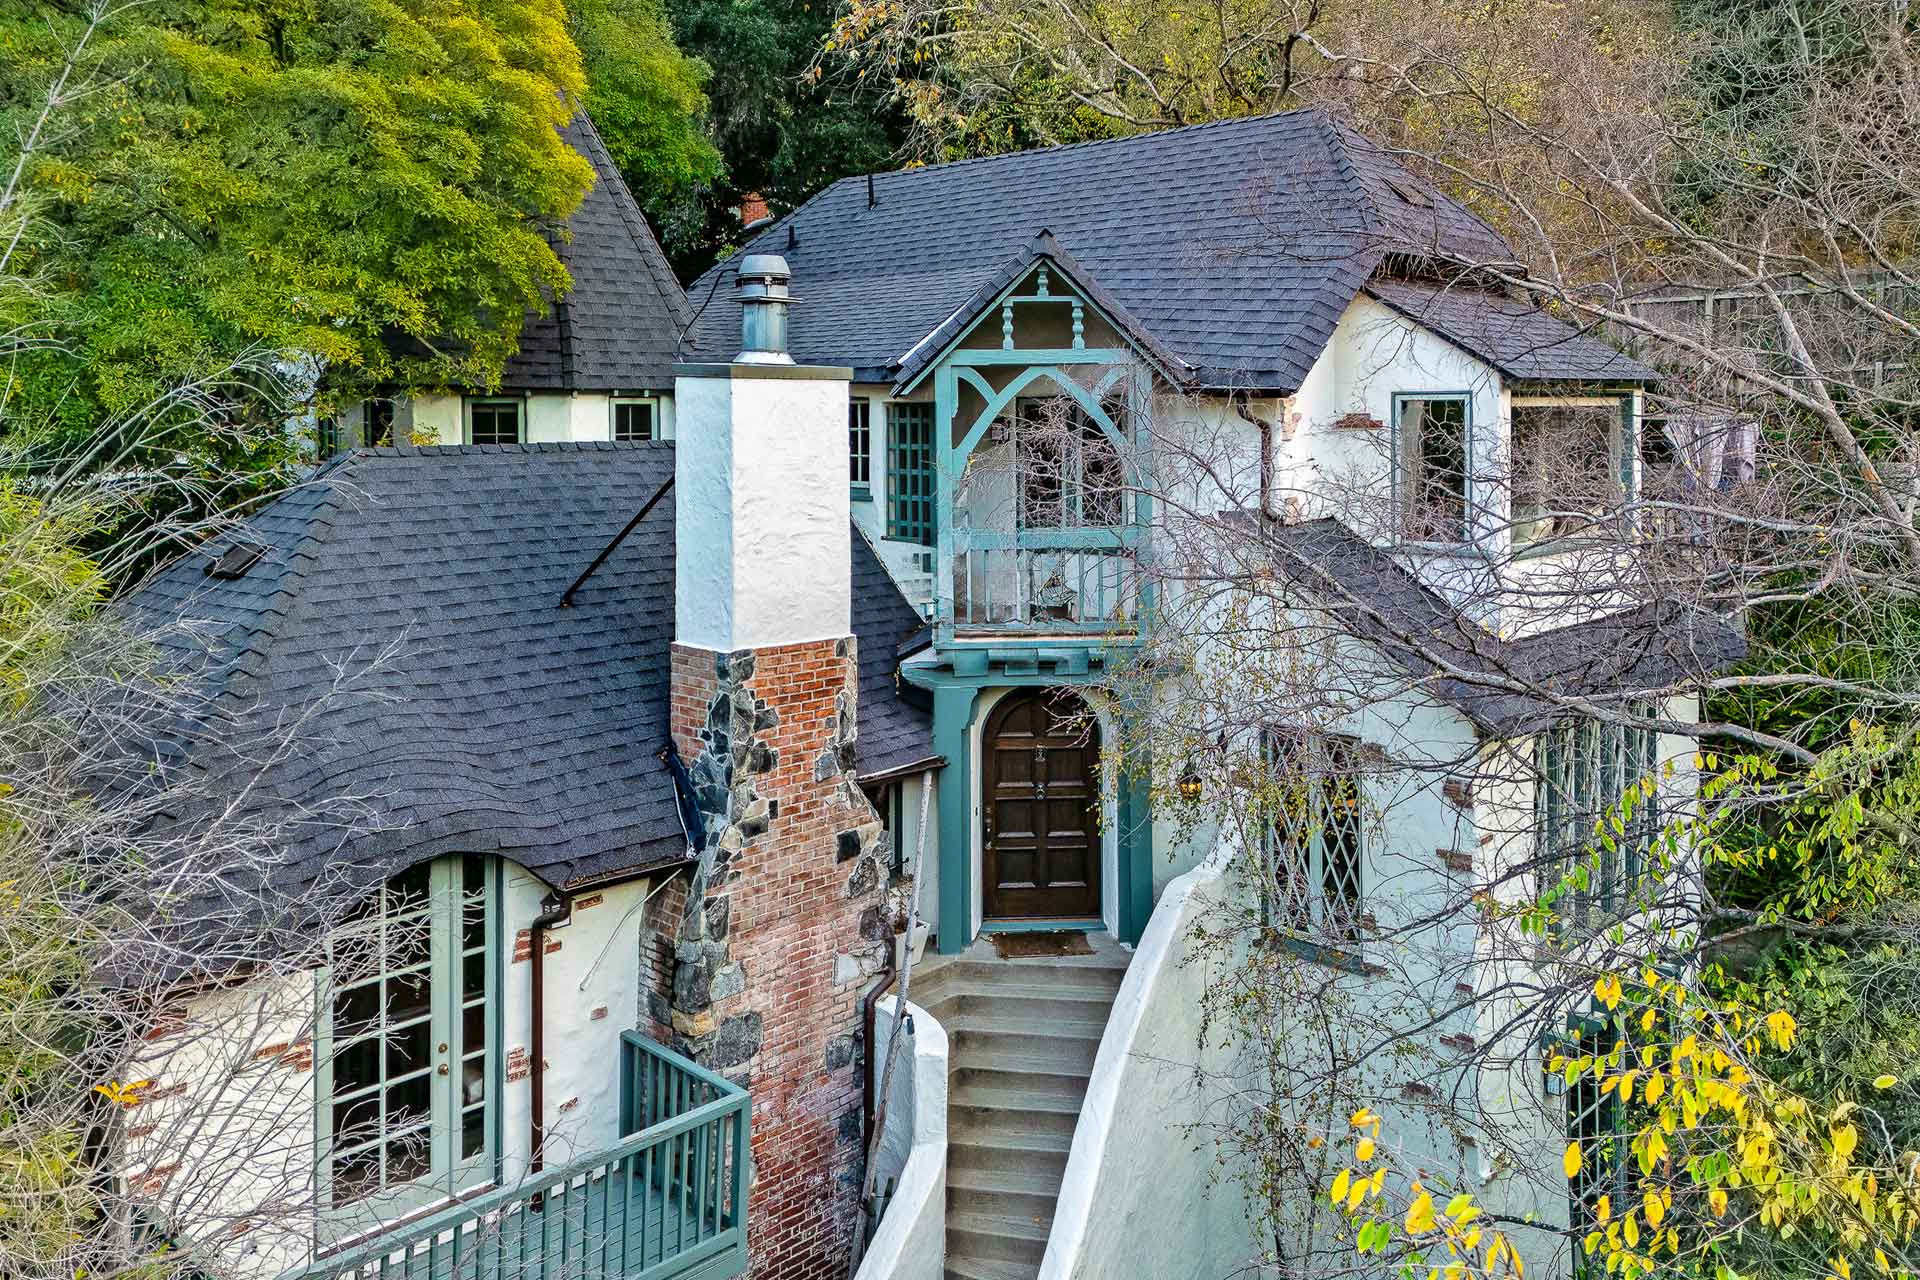 Rufus Wainwright’s Laurel Canyon Home Is Up For Sale